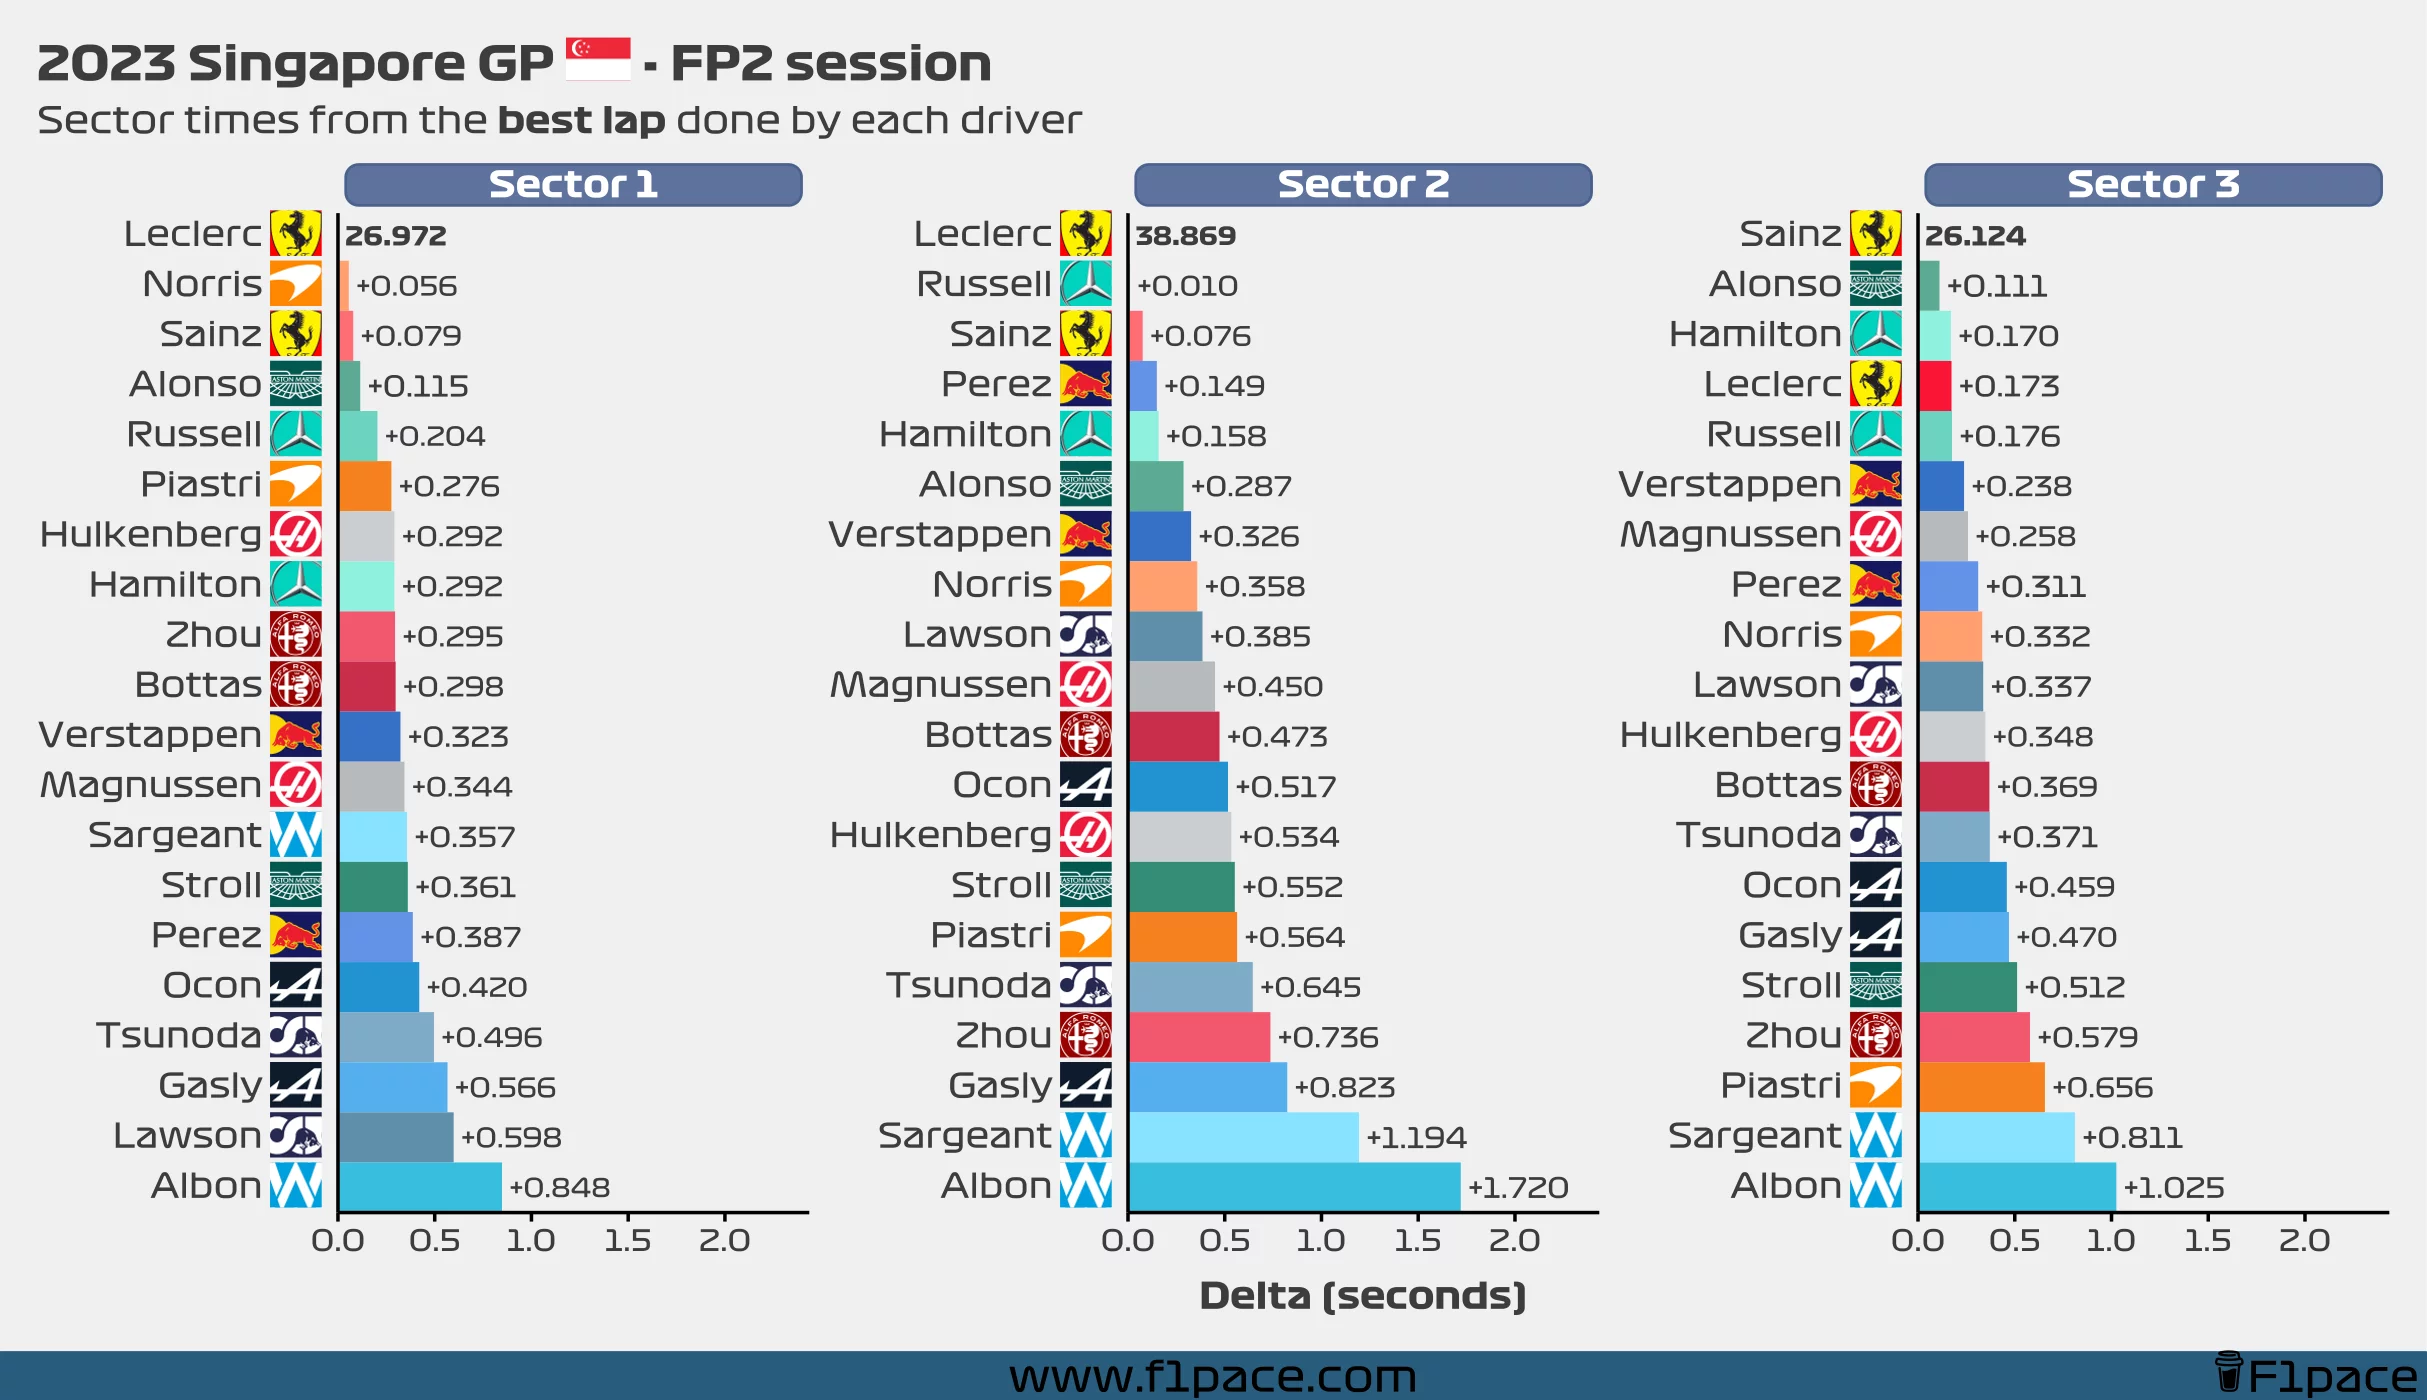 Sector times from the best lap done by each driver